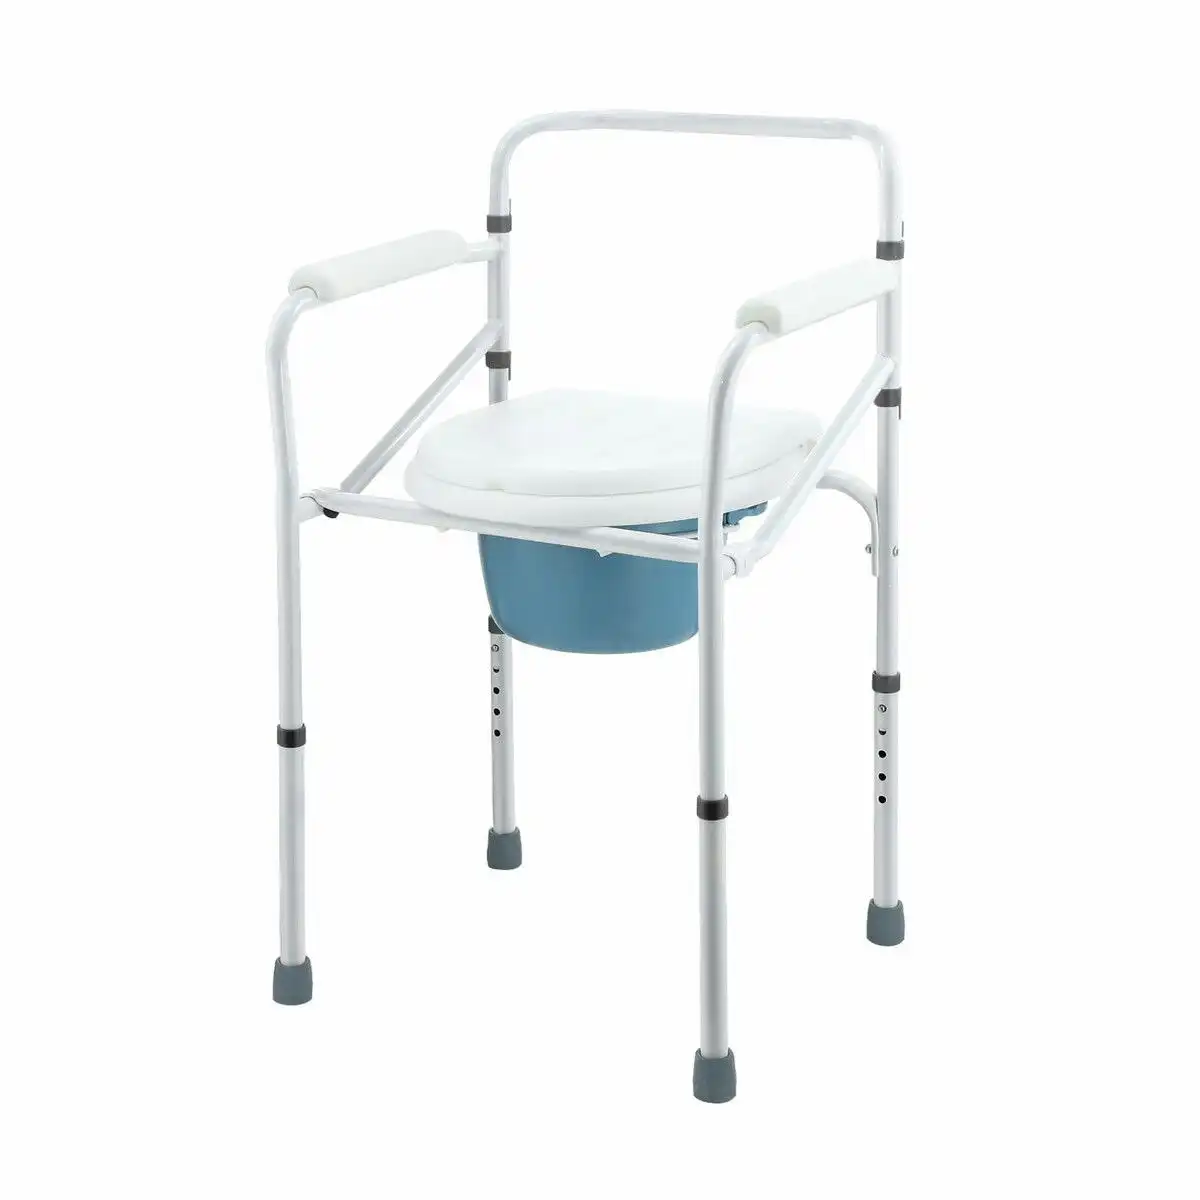 LUXSUITE Commode Shower Chair 3 In 1 Toilet Seat Wheelchair Bathroom Bedside Adjustable Seating Folding With Arms